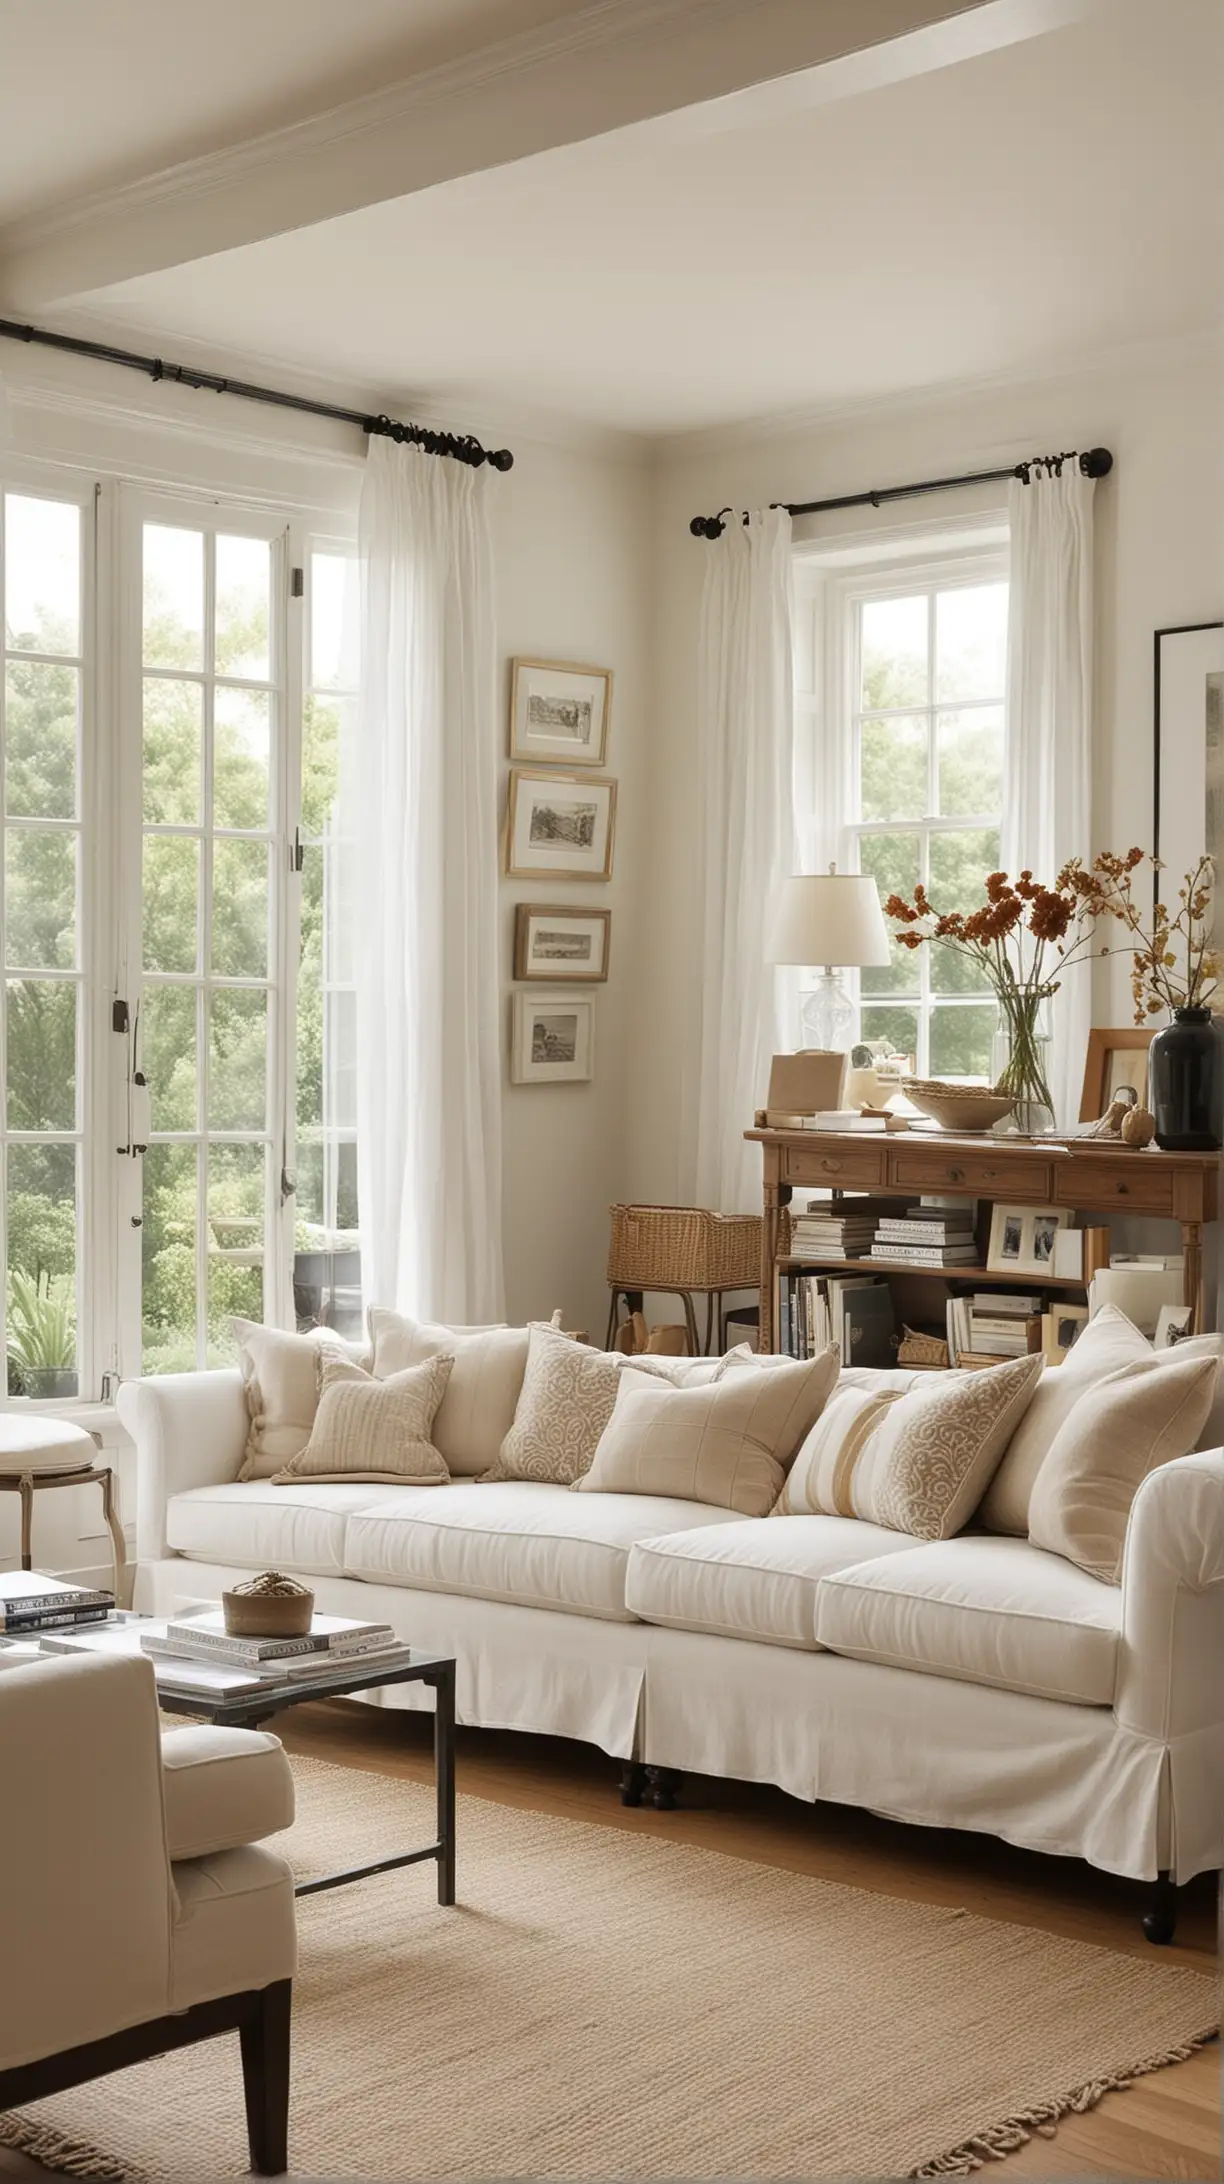 Create picture for Nancy Meyers Living Room and make sure it should be attractive and realistic. Make sure that every single object in the picture should be clear means full overview of the idea not a single object. The idea could be related to one or two items changing in the whole living room but you have to first analyze the theme and then create a whole picture of living room while implementing that idea into it. Only create one image to demonstrate the whole idea please. Here's the idea to create the picture [White Slipcovered Sofas

I love the idea of white slip-covered sofas because they're not only stylish but also incredibly versatile. They create a bright, welcoming feel in the living room and the best part? The slipcovers are easy to clean, making them perfect for homes that want both comfort and style without too much fuss.]